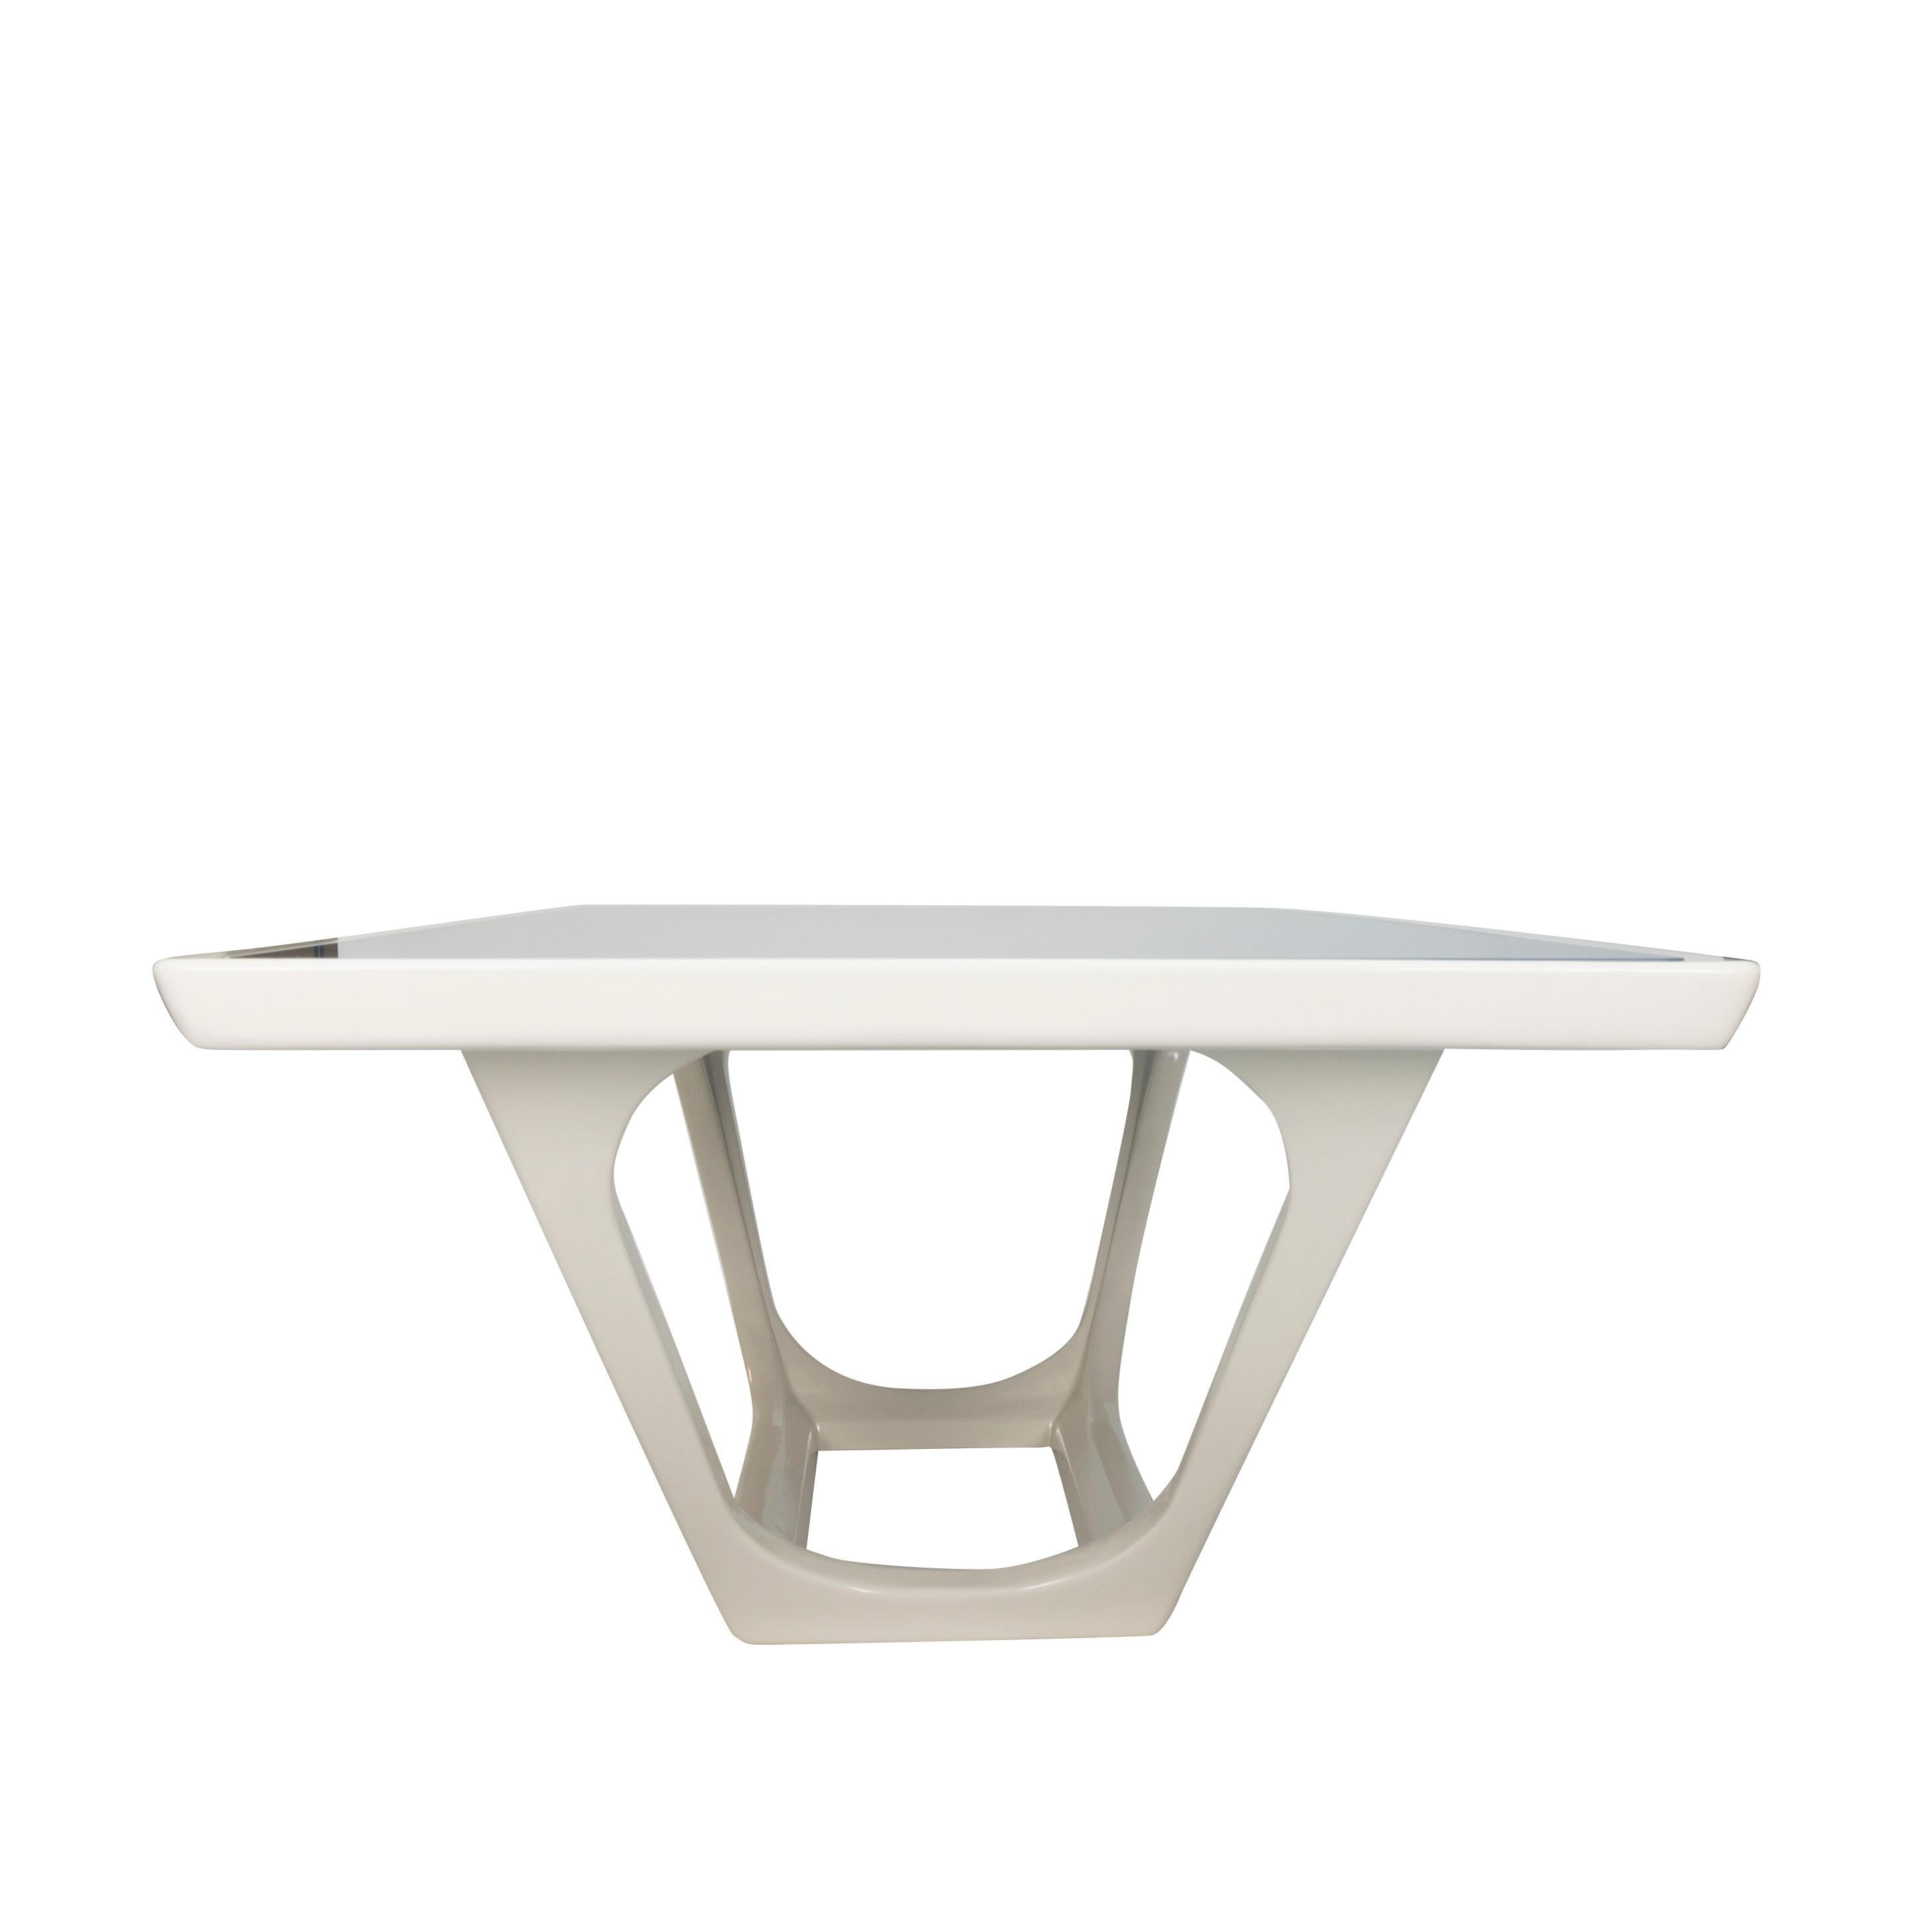 Our Piscina dining table is an original concept inspired by Italian design with simplistic style. The table features a maple frame lacquered in linen white with blue painted glass on top. The base features trapezoidal cutout with rounded edges and a